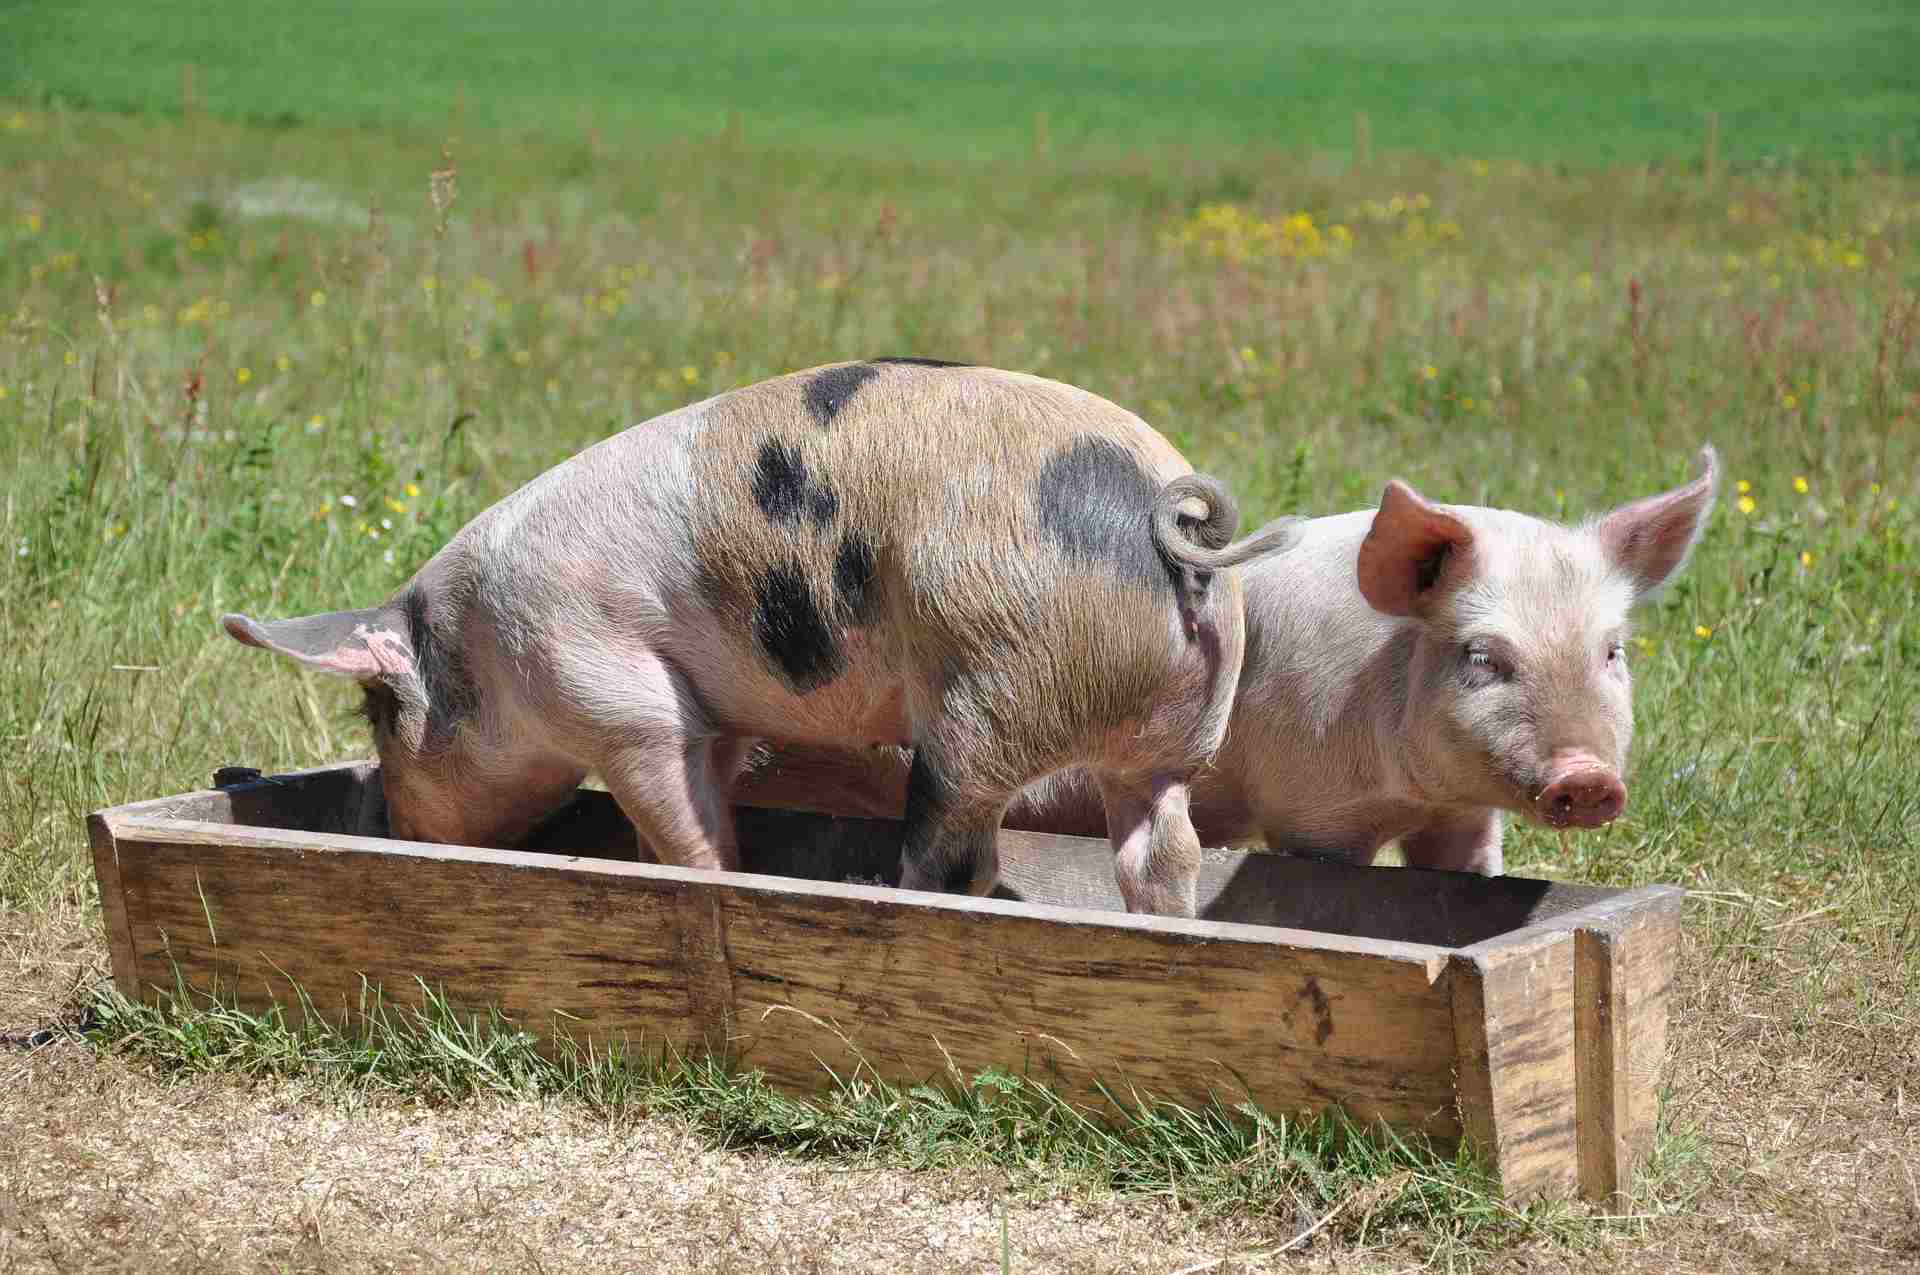 Piglets eating from a trough.